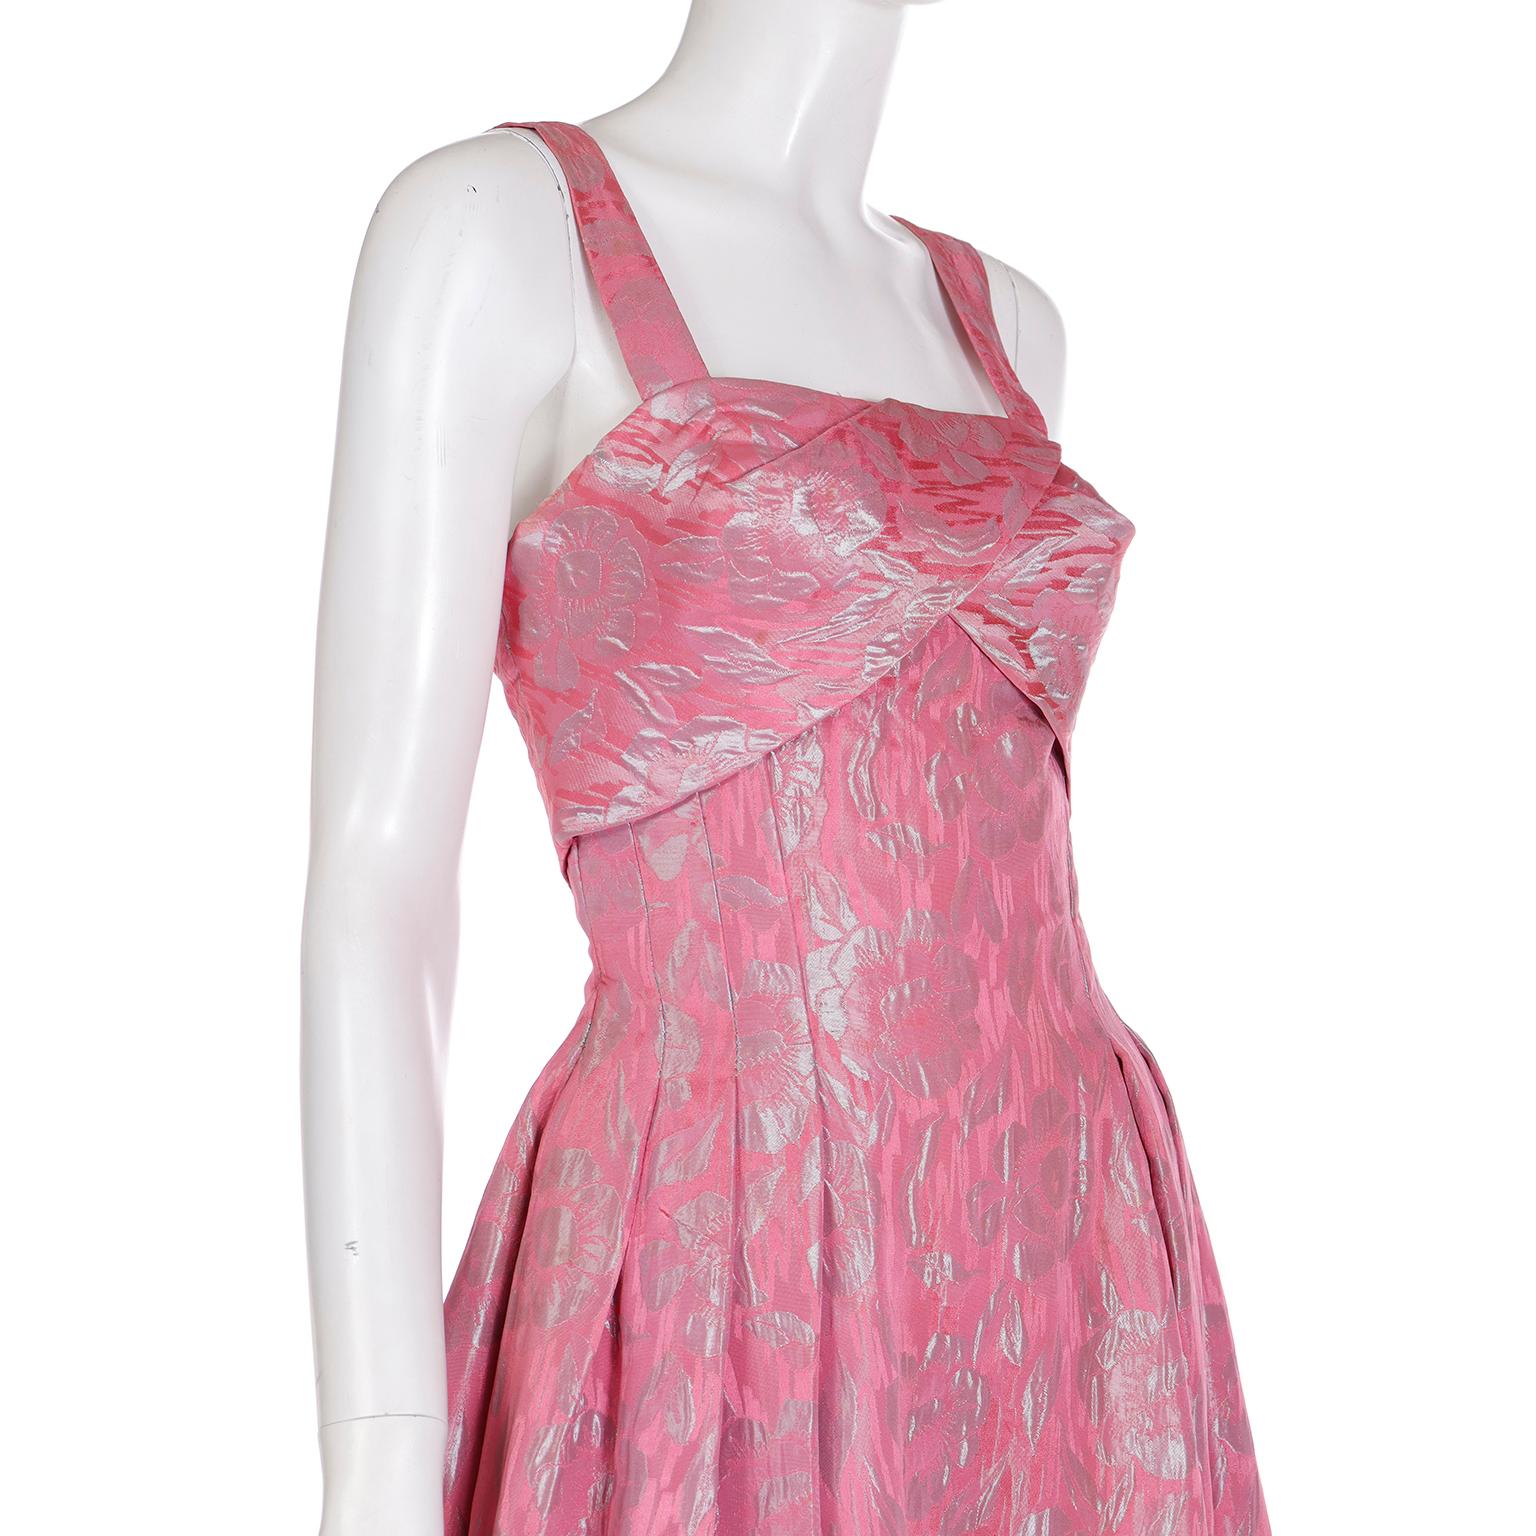 Norman Young 1950s Vintage Pink Jacquard Evening Gown 3